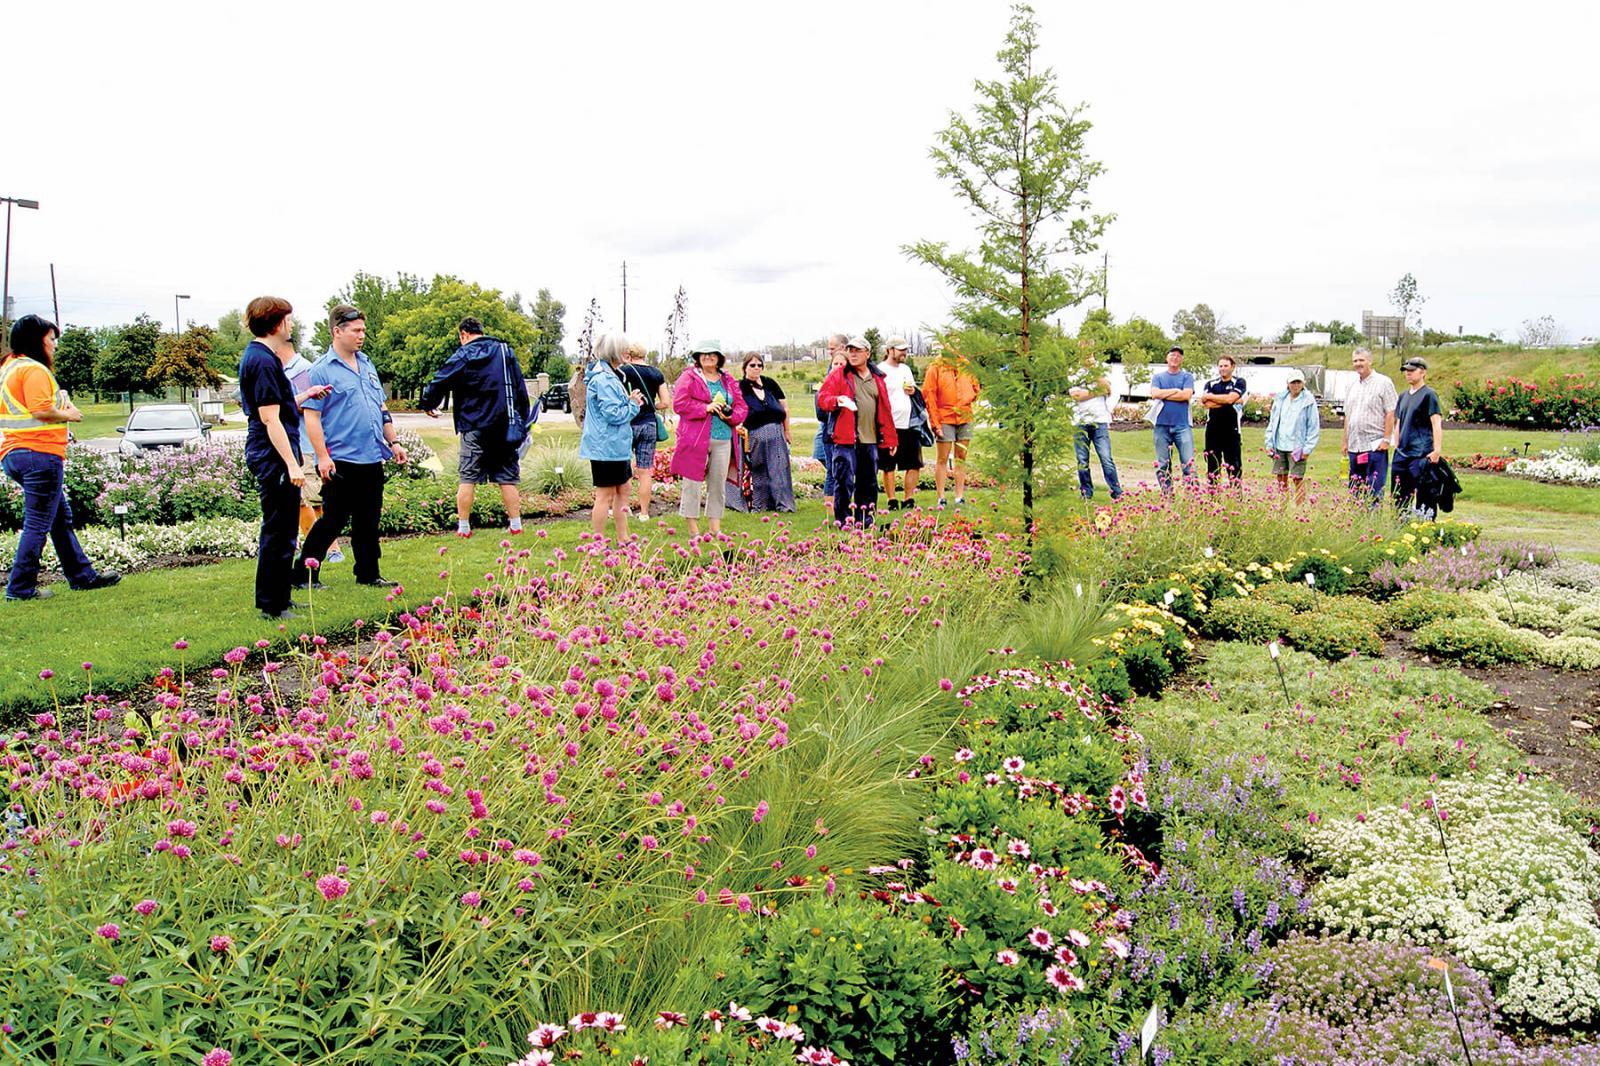 Attendance is best ever at ninth annual trial garden open house